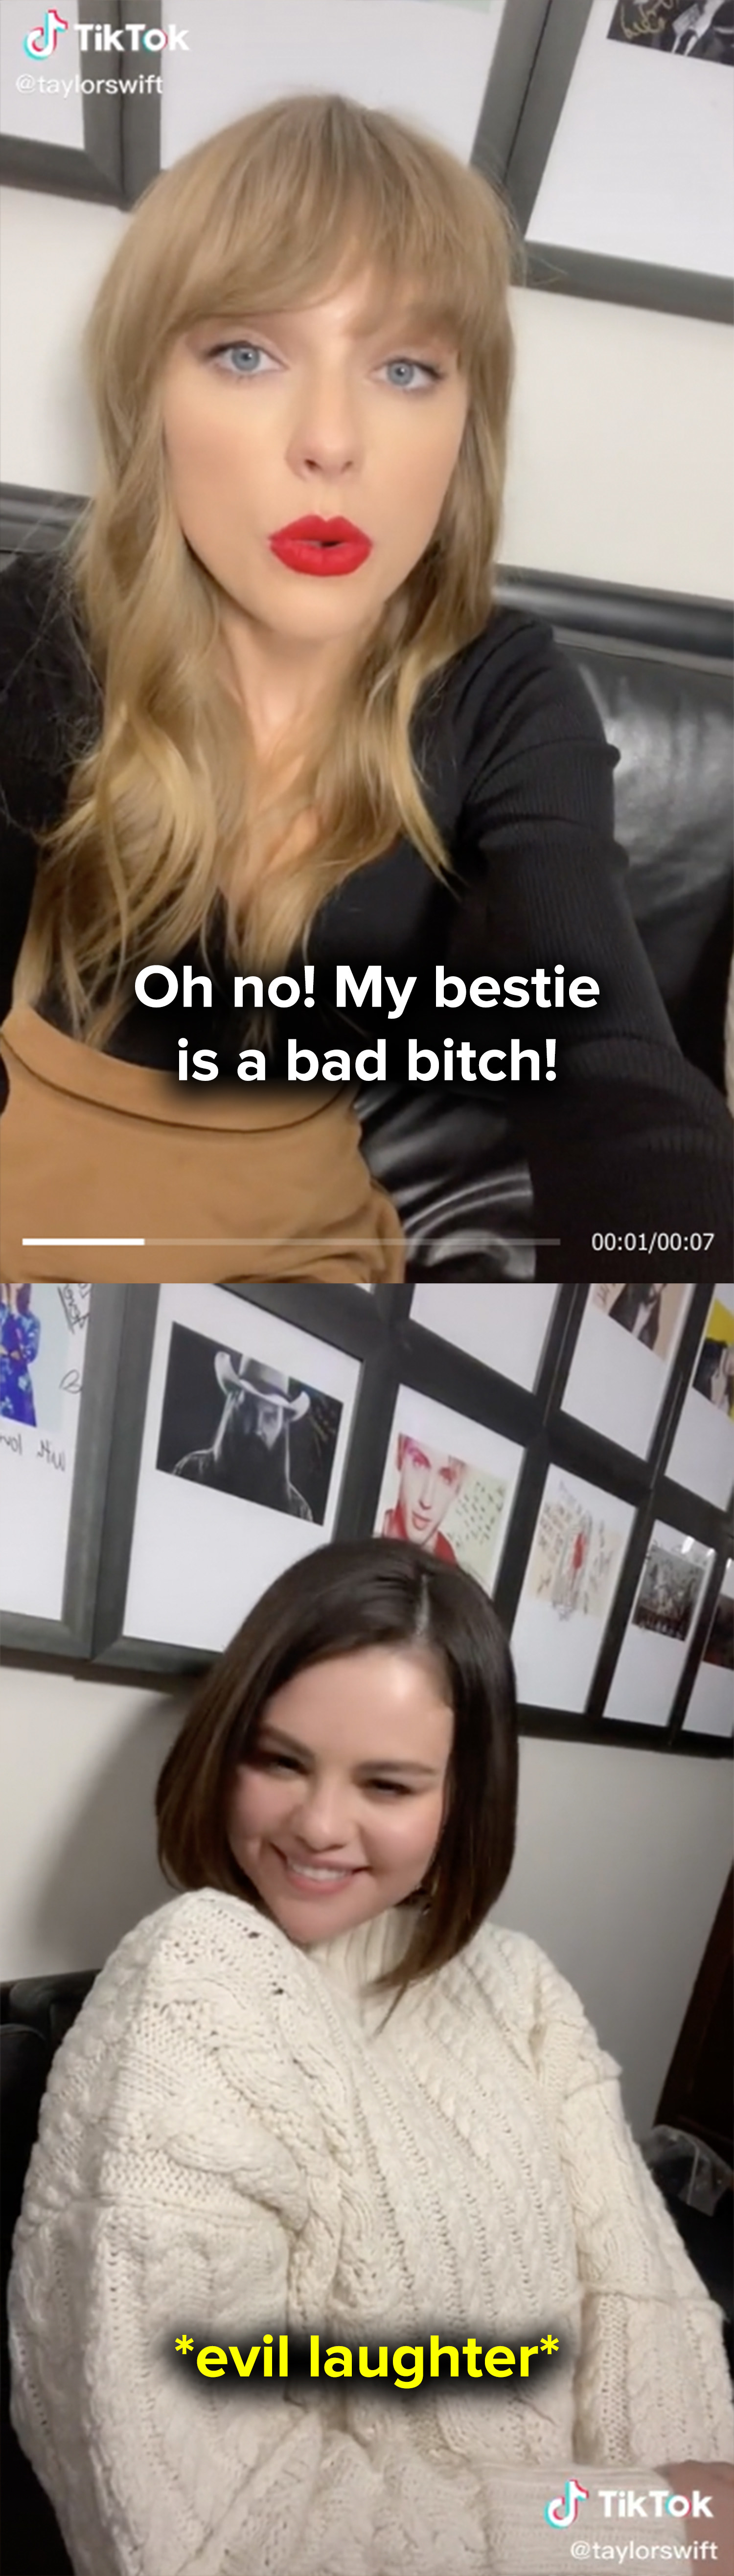 Oh no, my bestie is a bad bitch